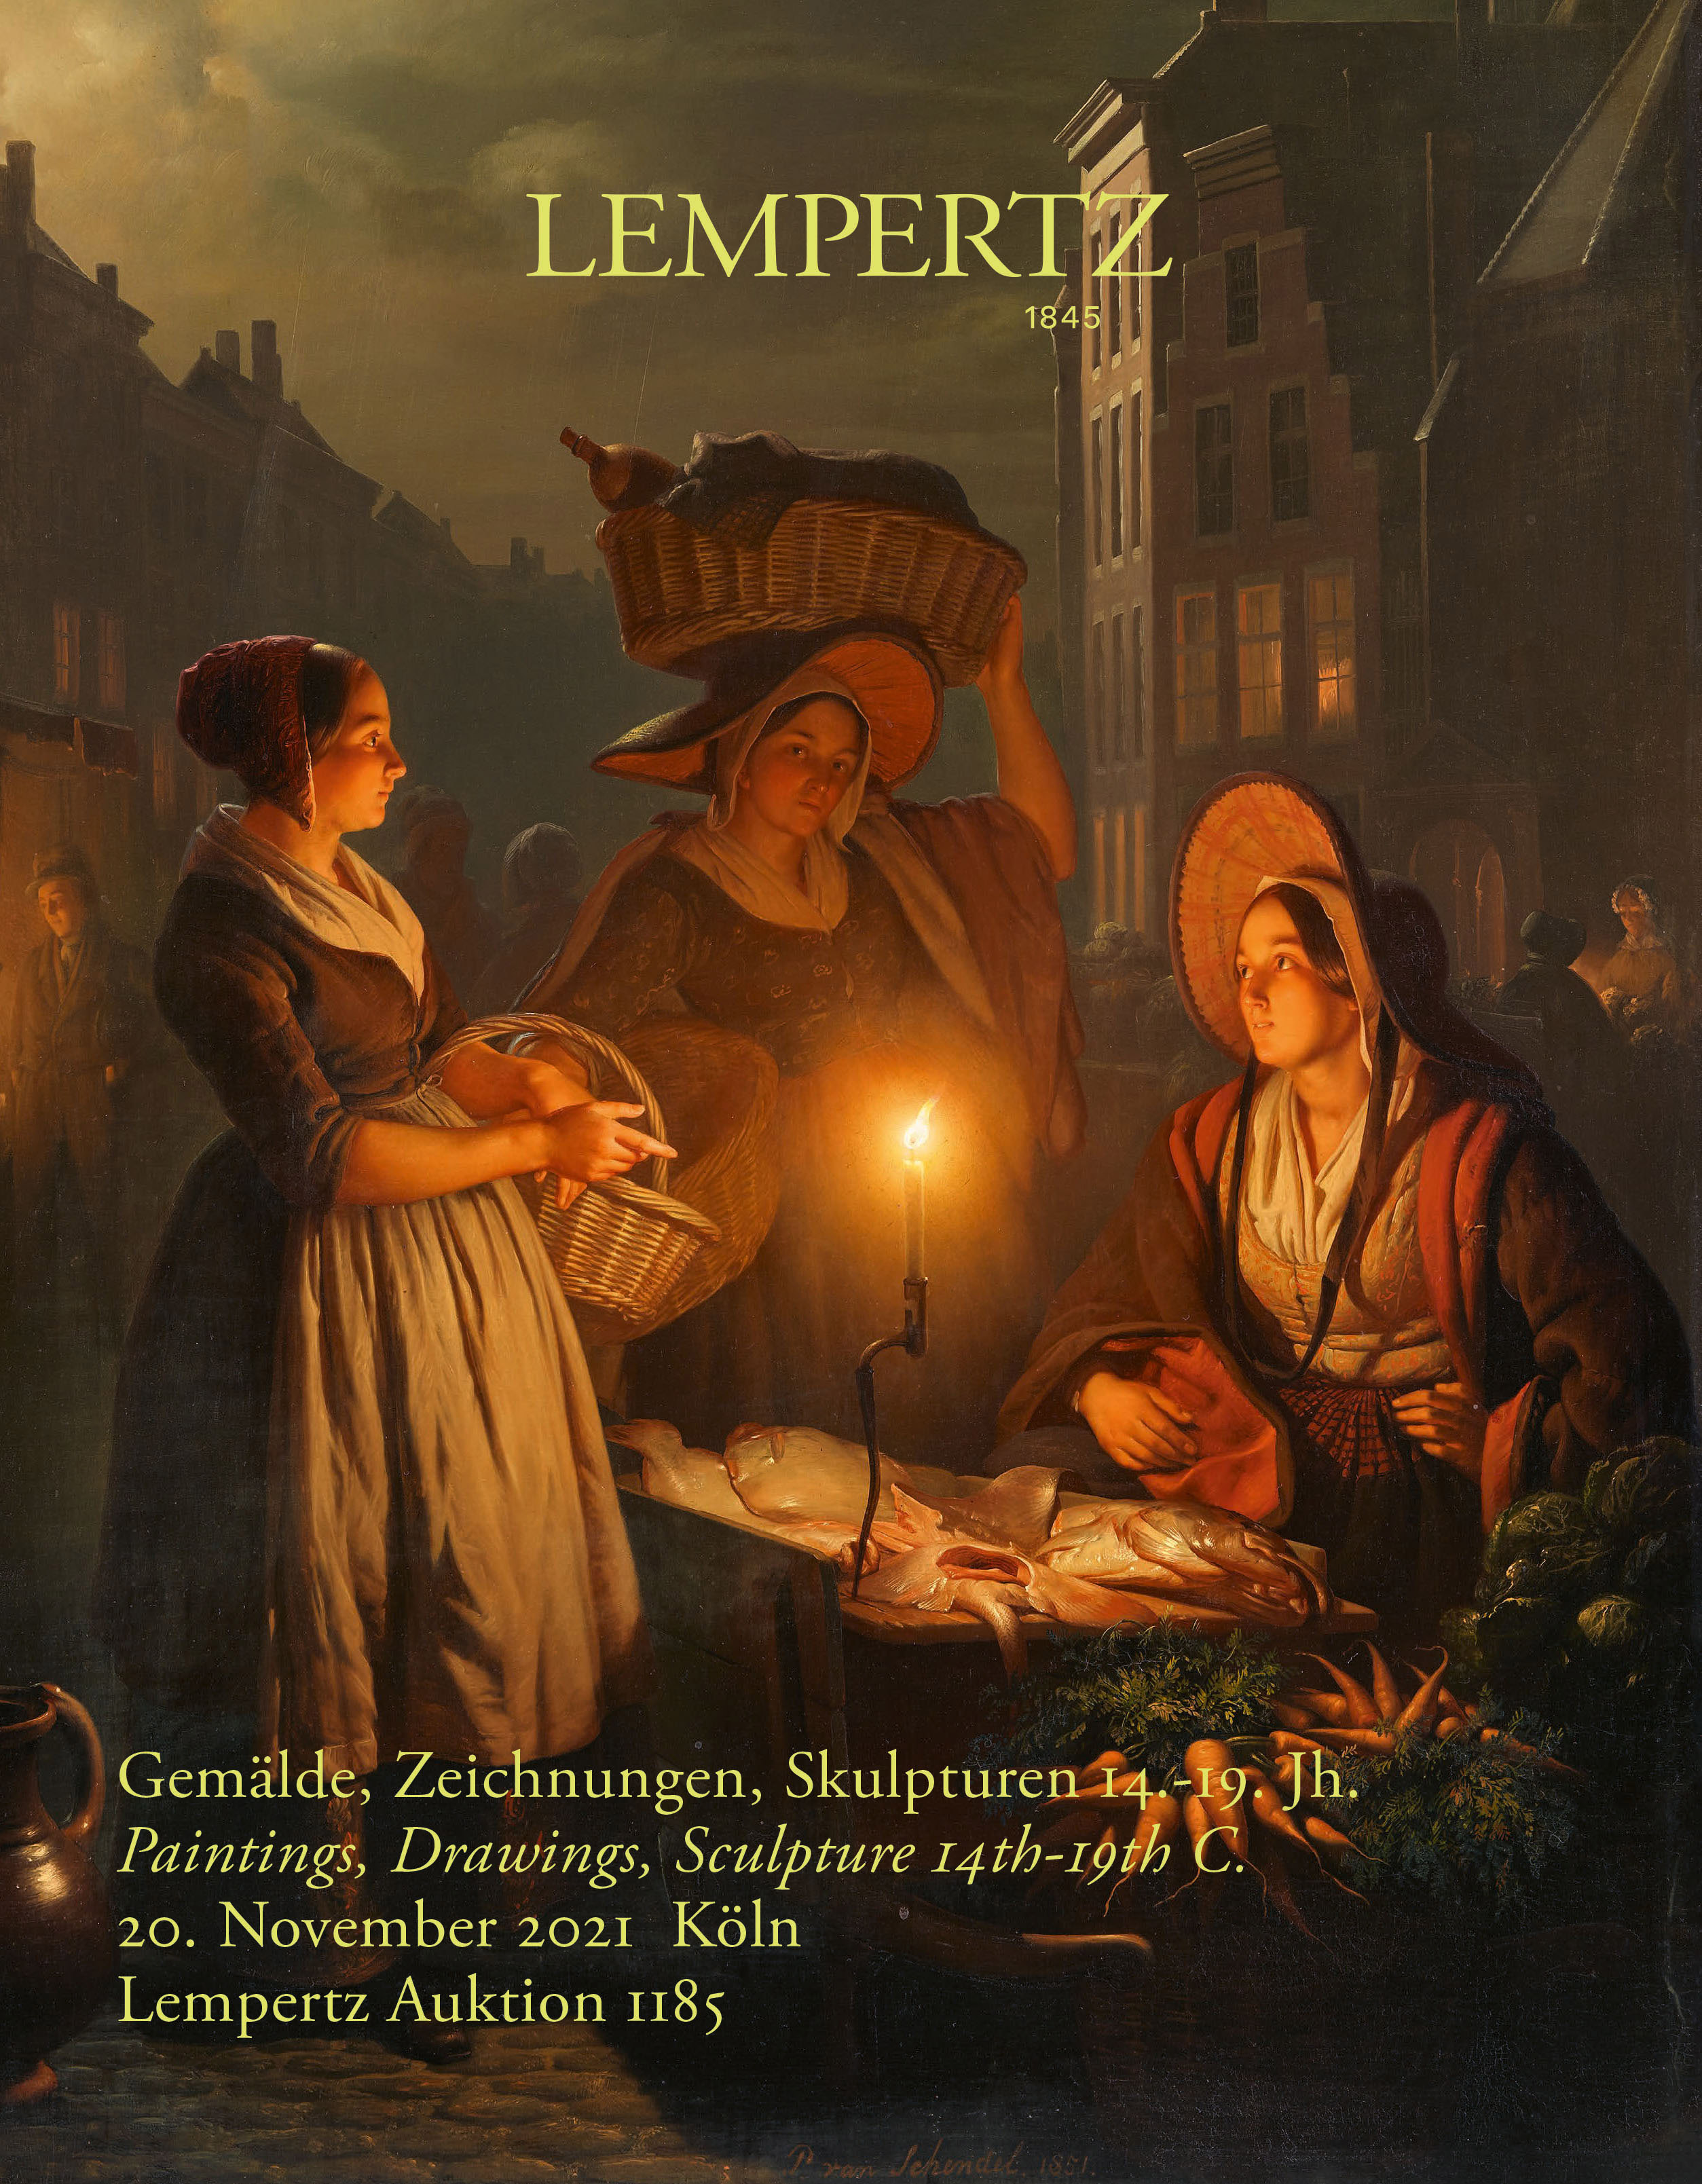 Catalogue - Paintings, Drawings, Sculpture 14th - 19th C. - Online Catalogue - Auction 1185 – Purchase valuable works of art at the next Lempertz-Auction!